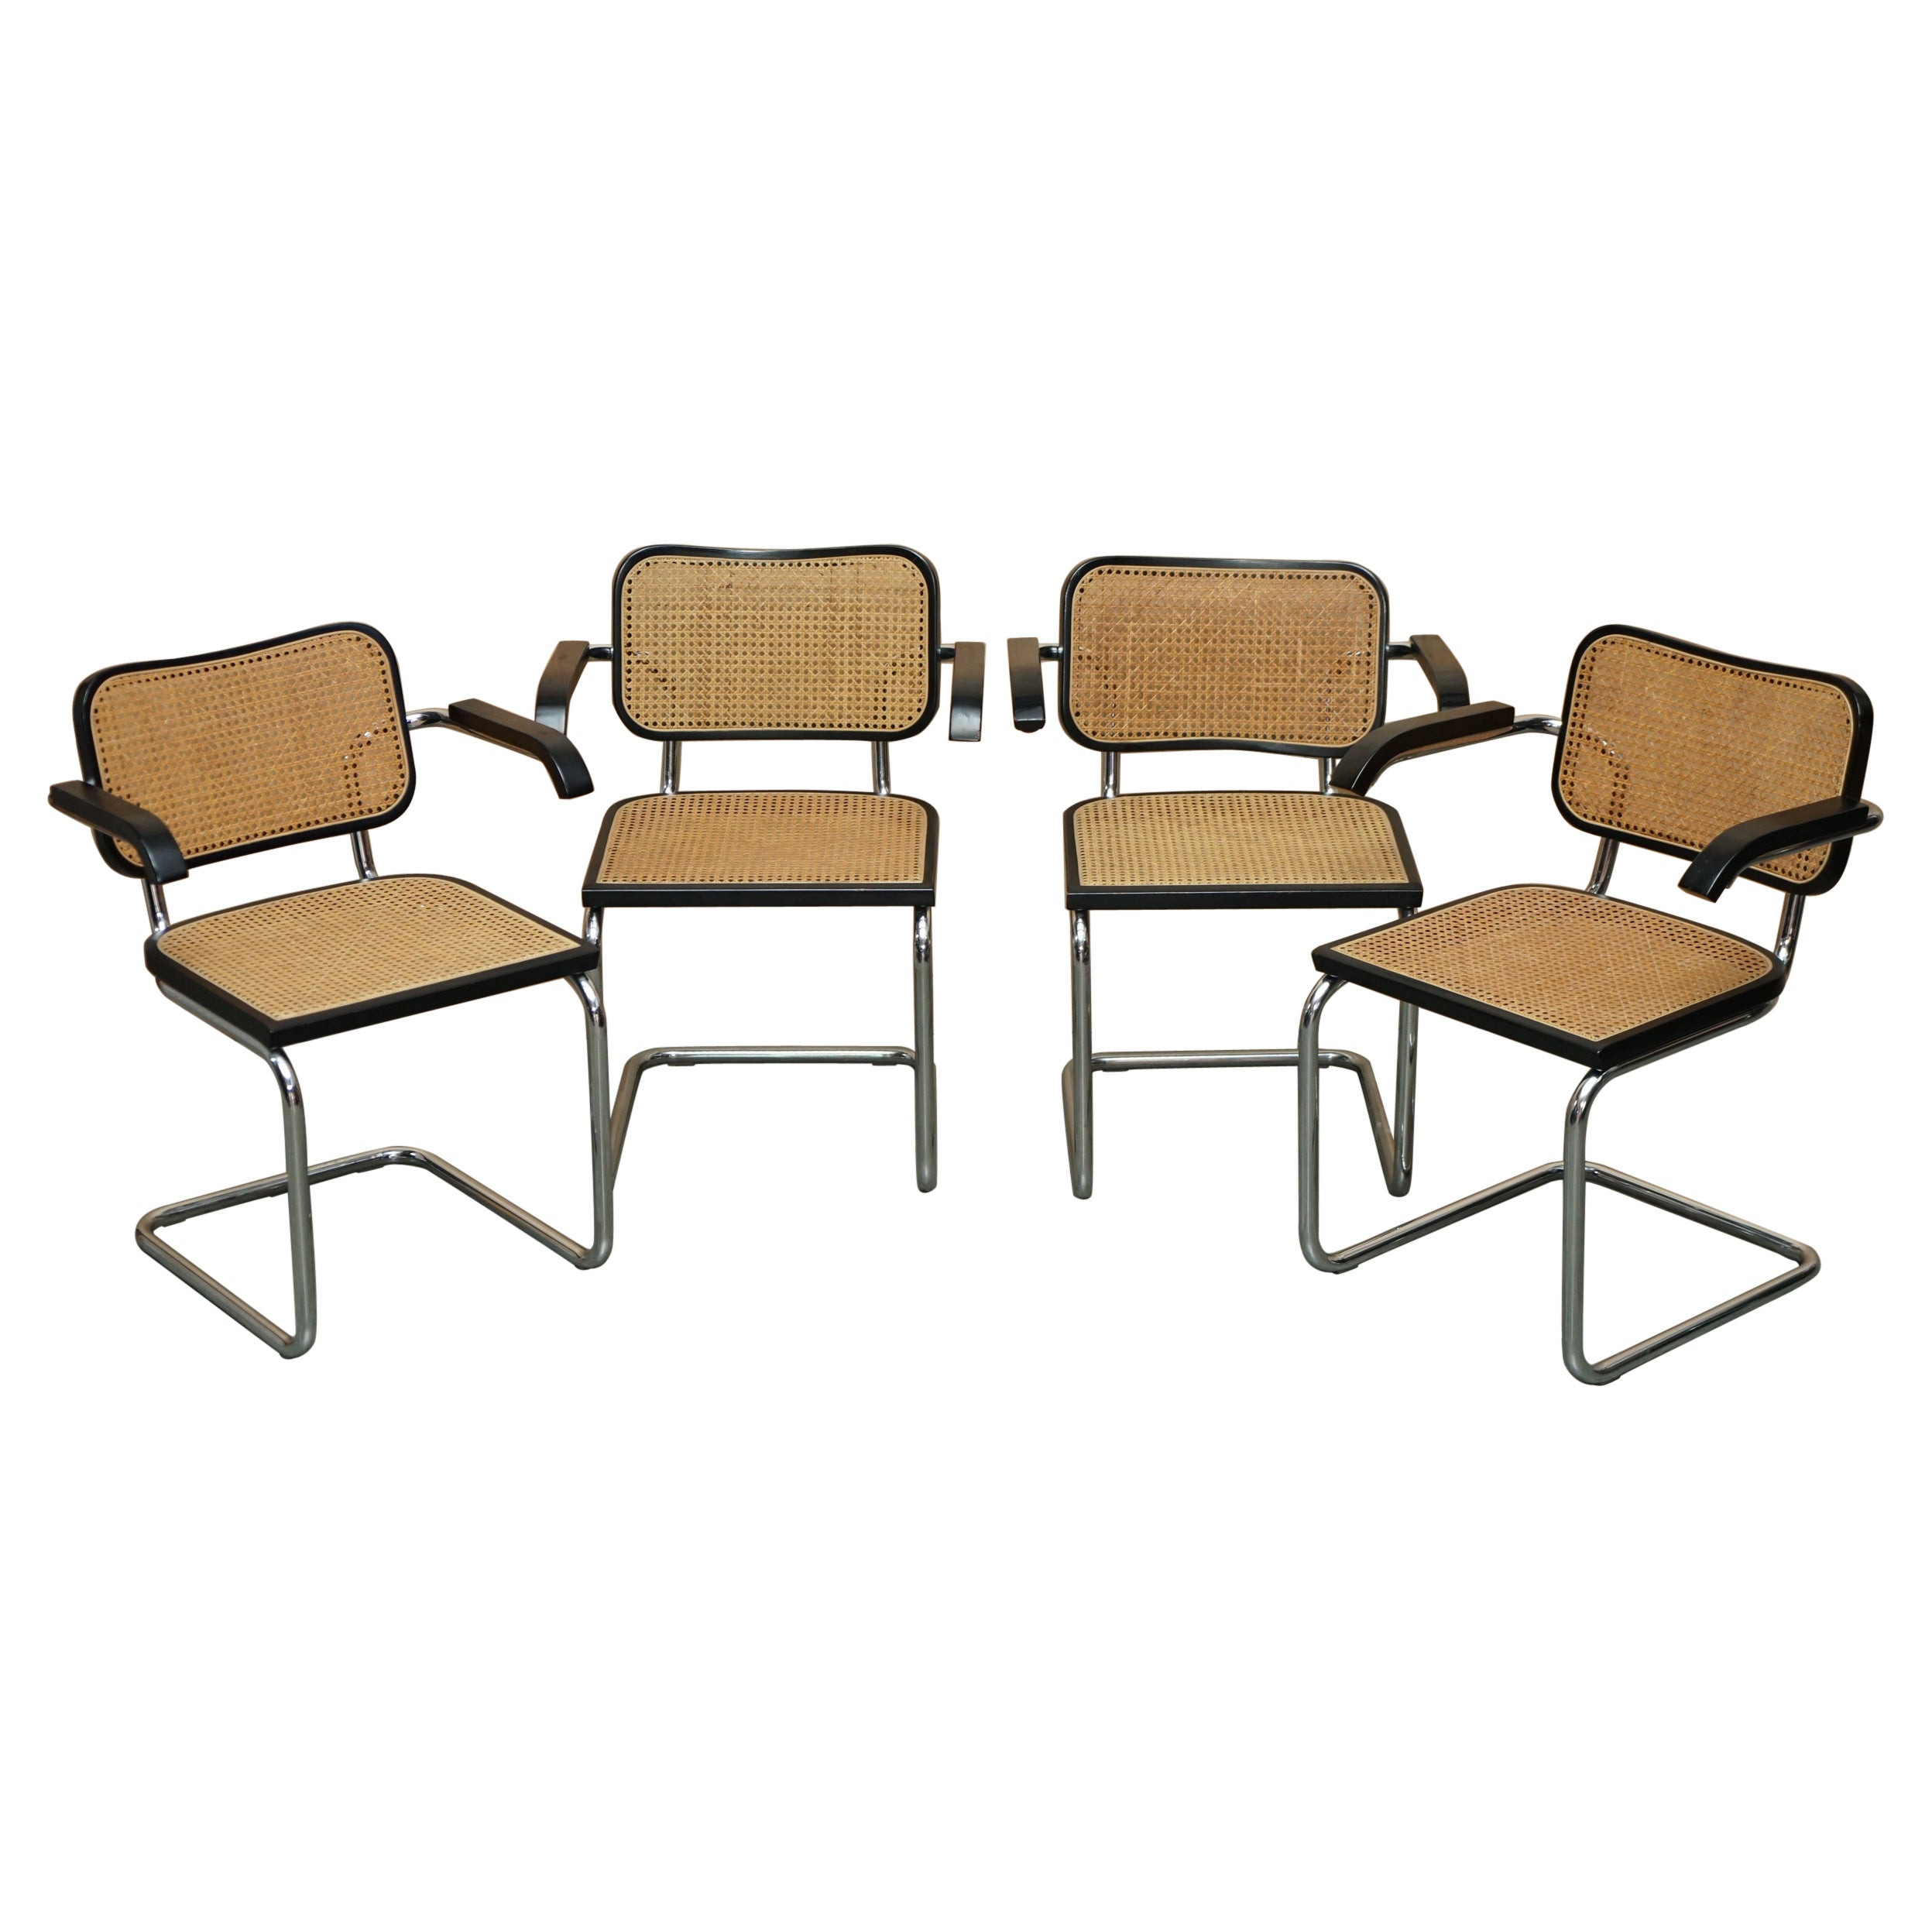 Four Vintage 1970 Made in Italy Stamped Marcel Breuer Cesca Knoll Dining Chairs